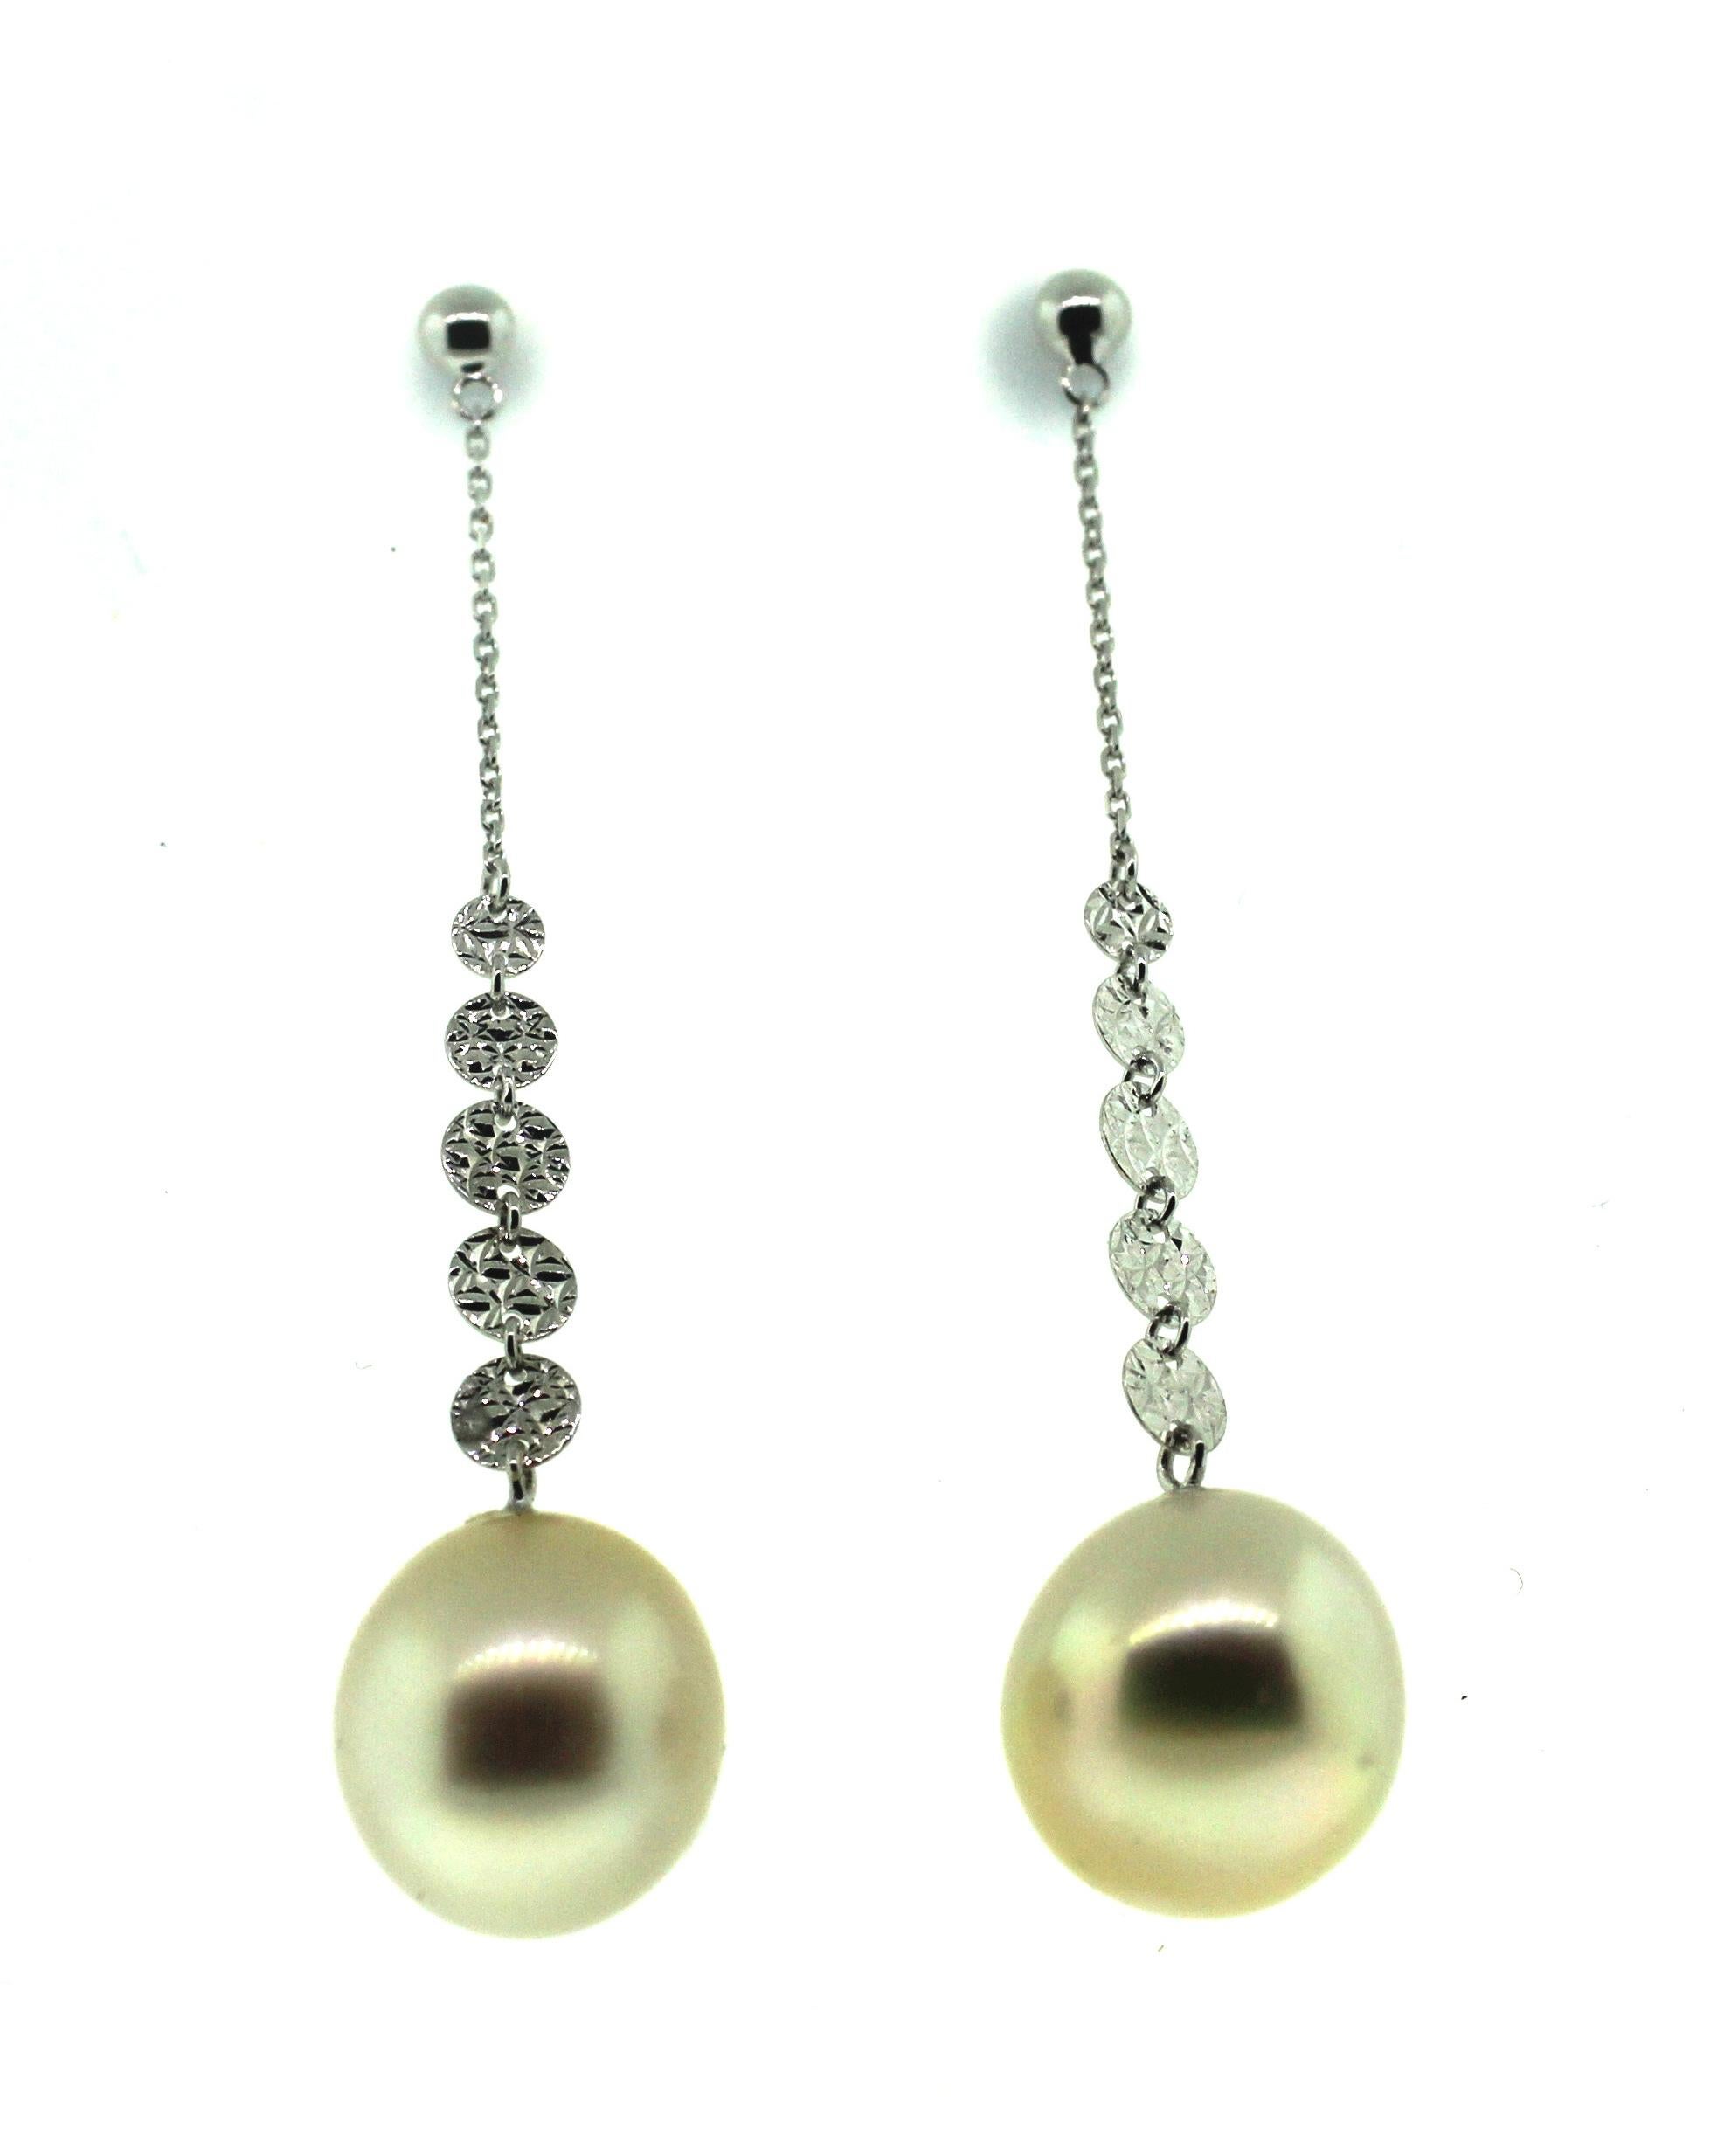 Hakimoto By Jewel Of Ocean
18K White Gold 
Natural Color Drop Cultured Pearl Earrings.
Total item weight 5.4 grams
11.5x12.5 mm Natural color South Sea Drop Cultured Pearls
18K White Gold High Polish
Orient: Very Good
Luster: Very Good
Nacre: Very